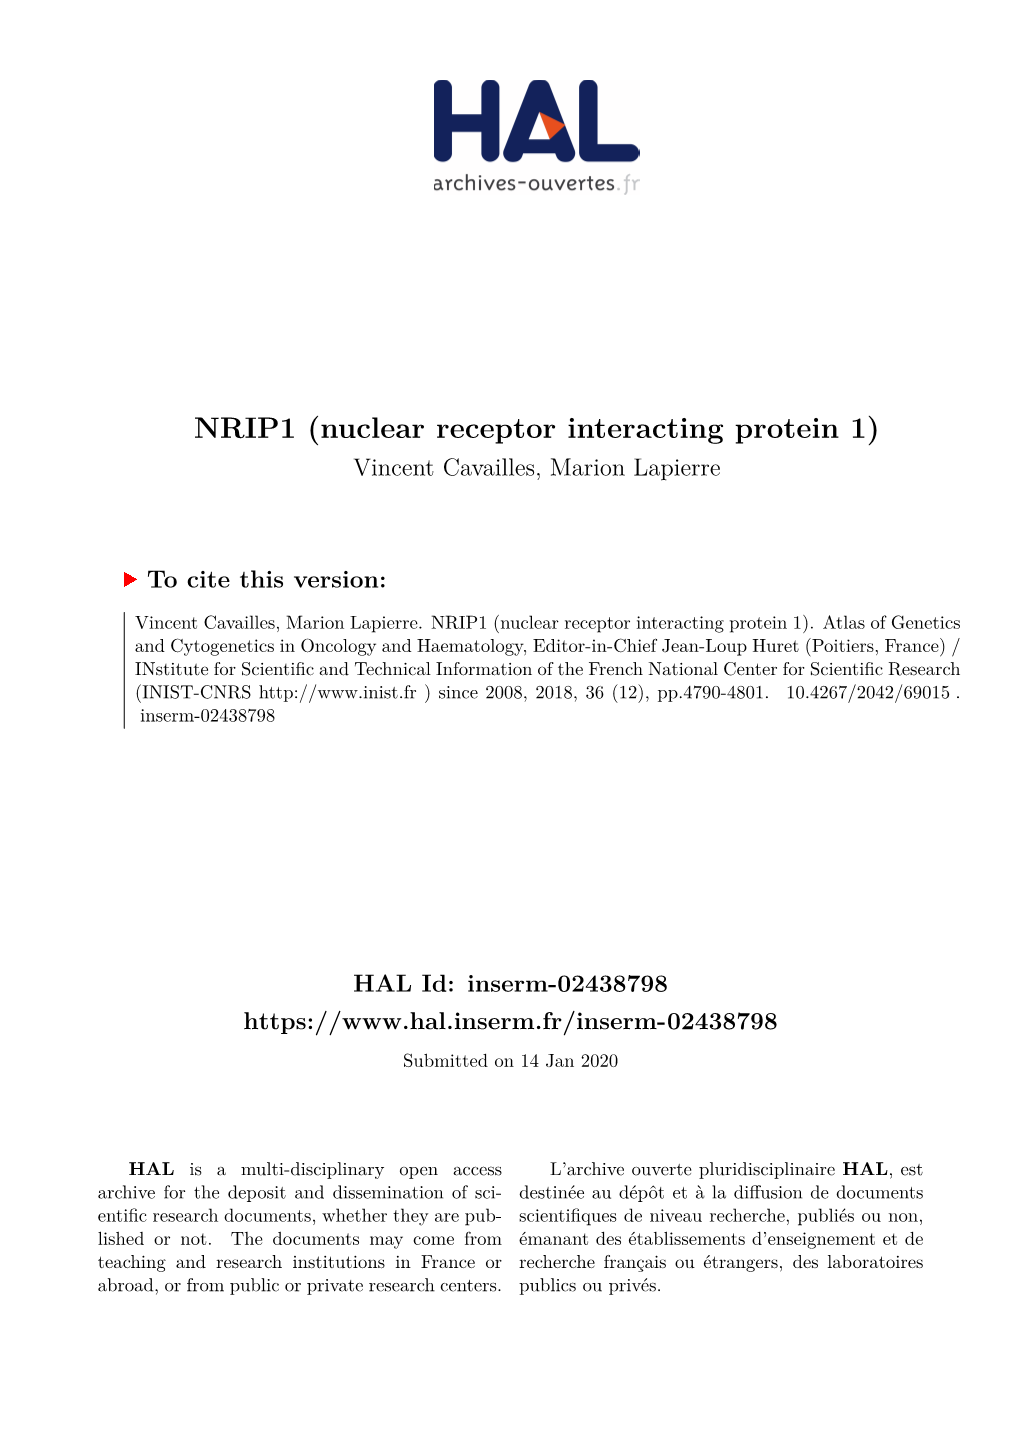 NRIP1 (Nuclear Receptor Interacting Protein 1) Vincent Cavailles, Marion Lapierre